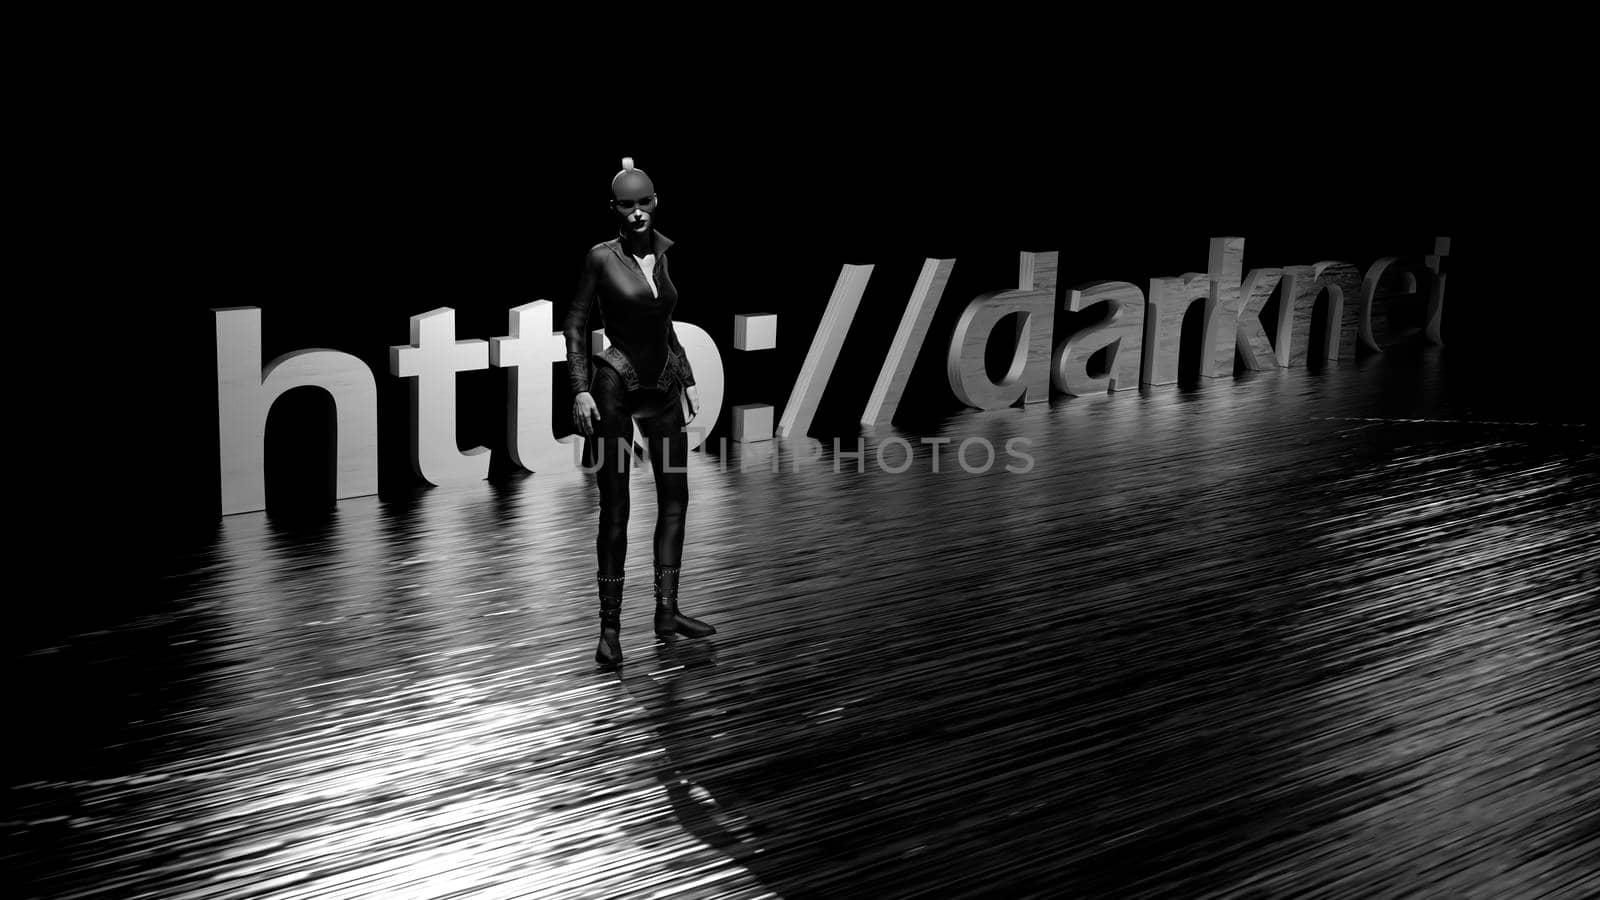 Darknet text word on dark background and a woman in black 3d rendering